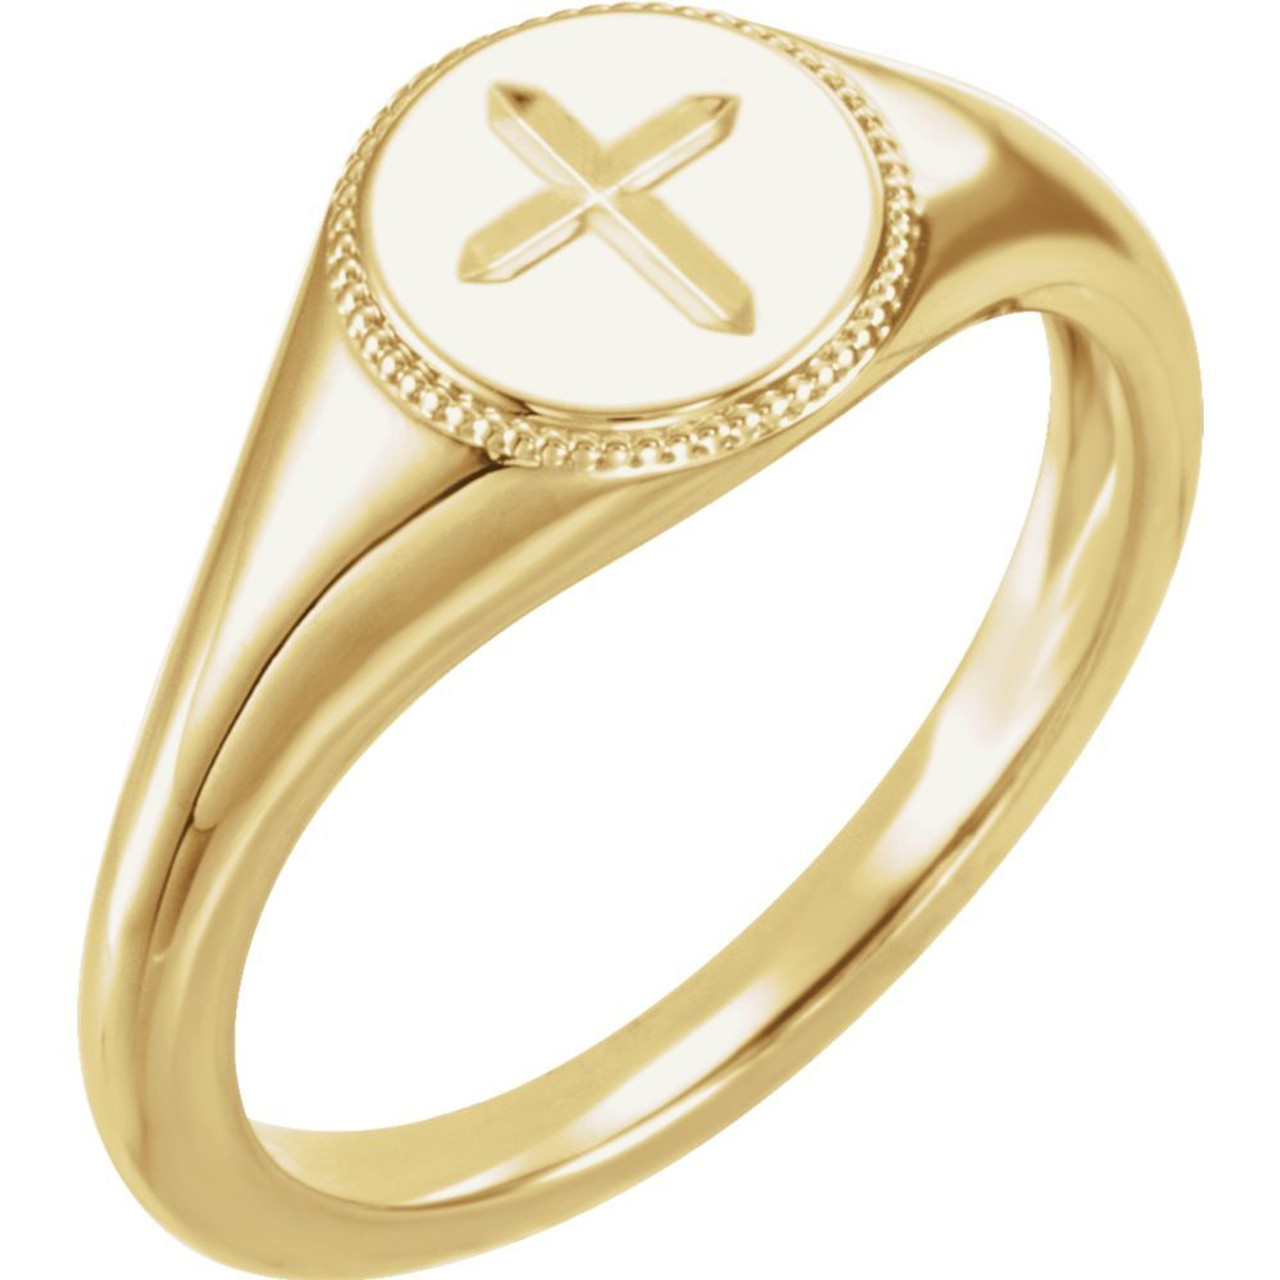 14K Yellow Gold Polished Textured Cross Ring - Size 7 - (B31-932) - Roy  Rose Jewelry